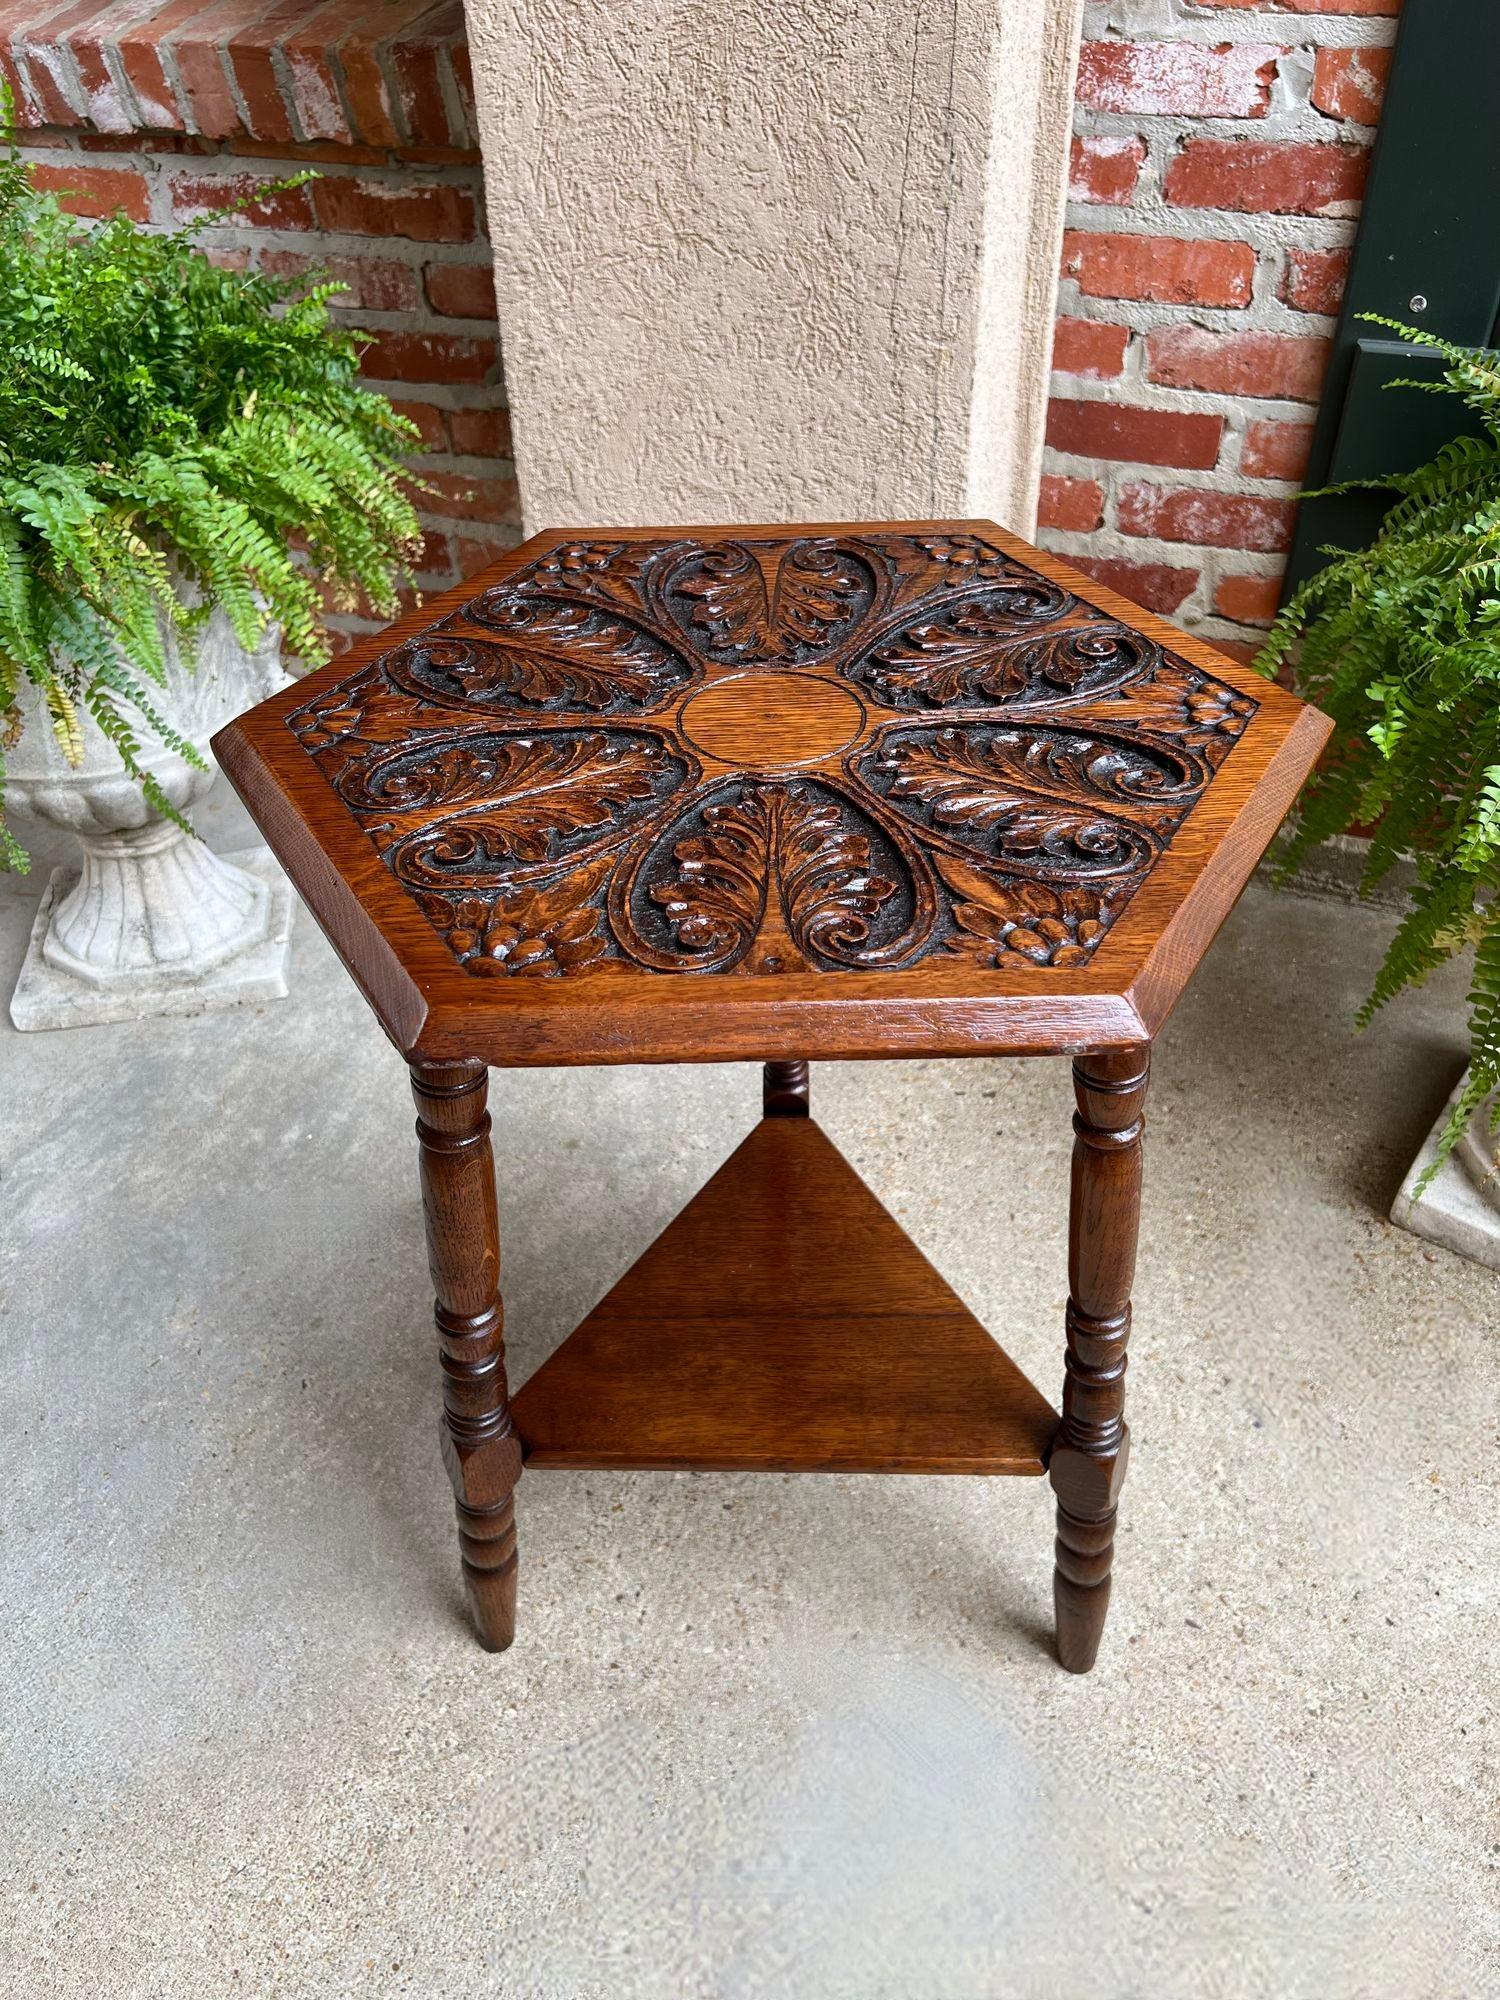 Antique English Cricket Table Hexagon Carved Oak End Side Table Arts & Crafts.

Direct from England, a charming and quite unique antique English “cricket” table.

“Cricket tables” originated in England and remain one of Britain’s most popular and